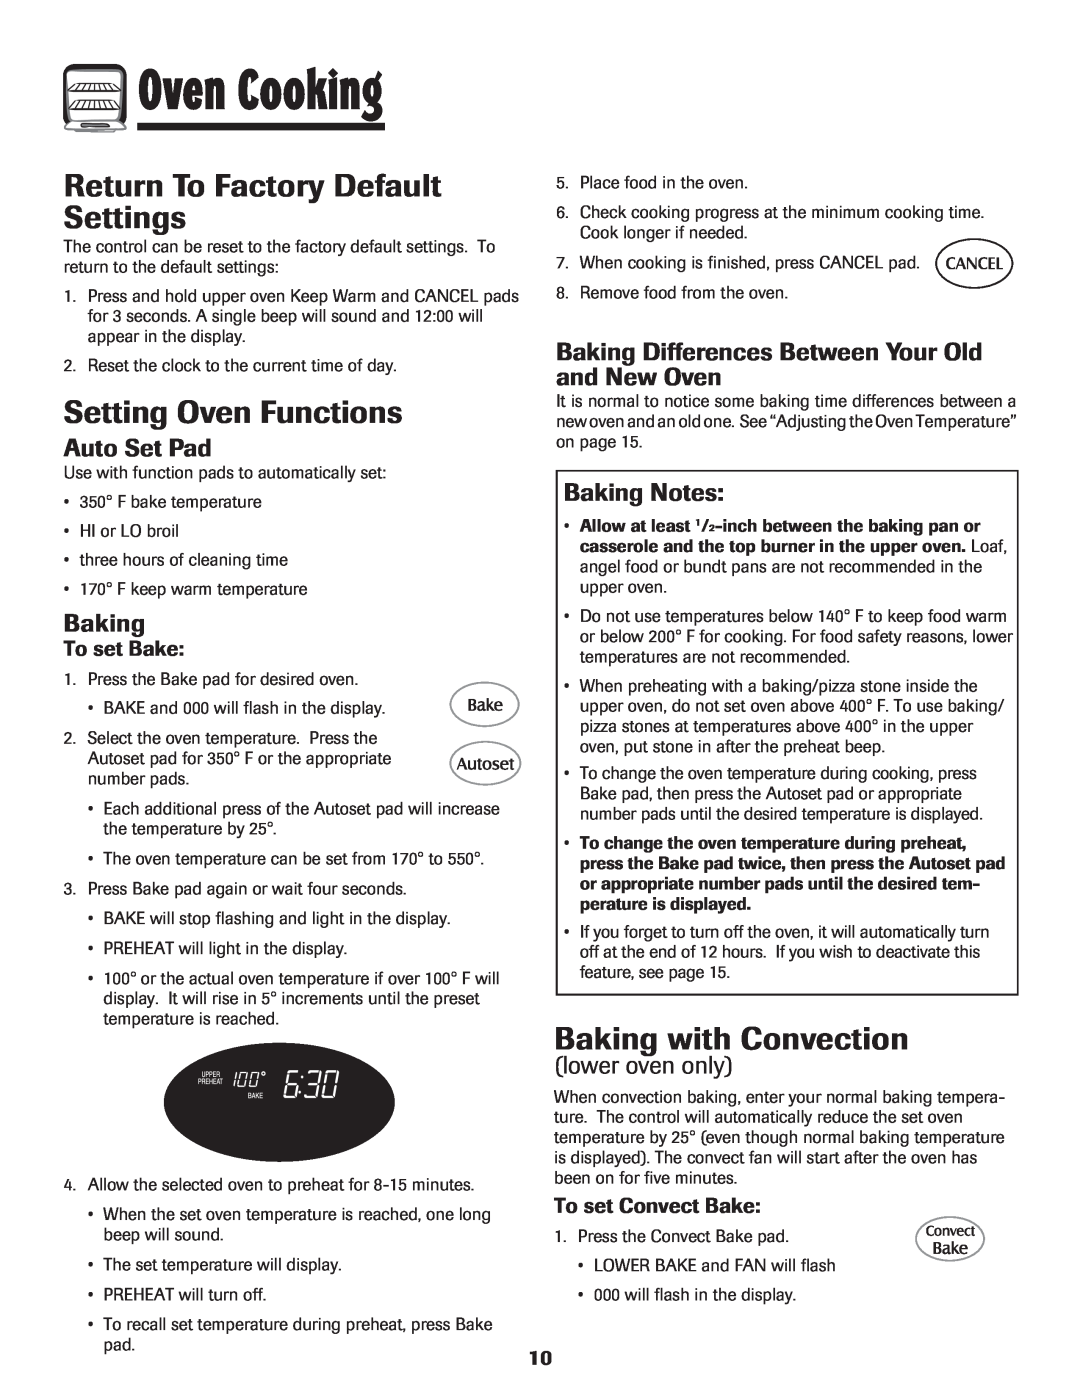 Maytag 850 Return To Factory Default Settings, Setting Oven Functions, Baking with Convection, Auto Set Pad, Baking Notes 